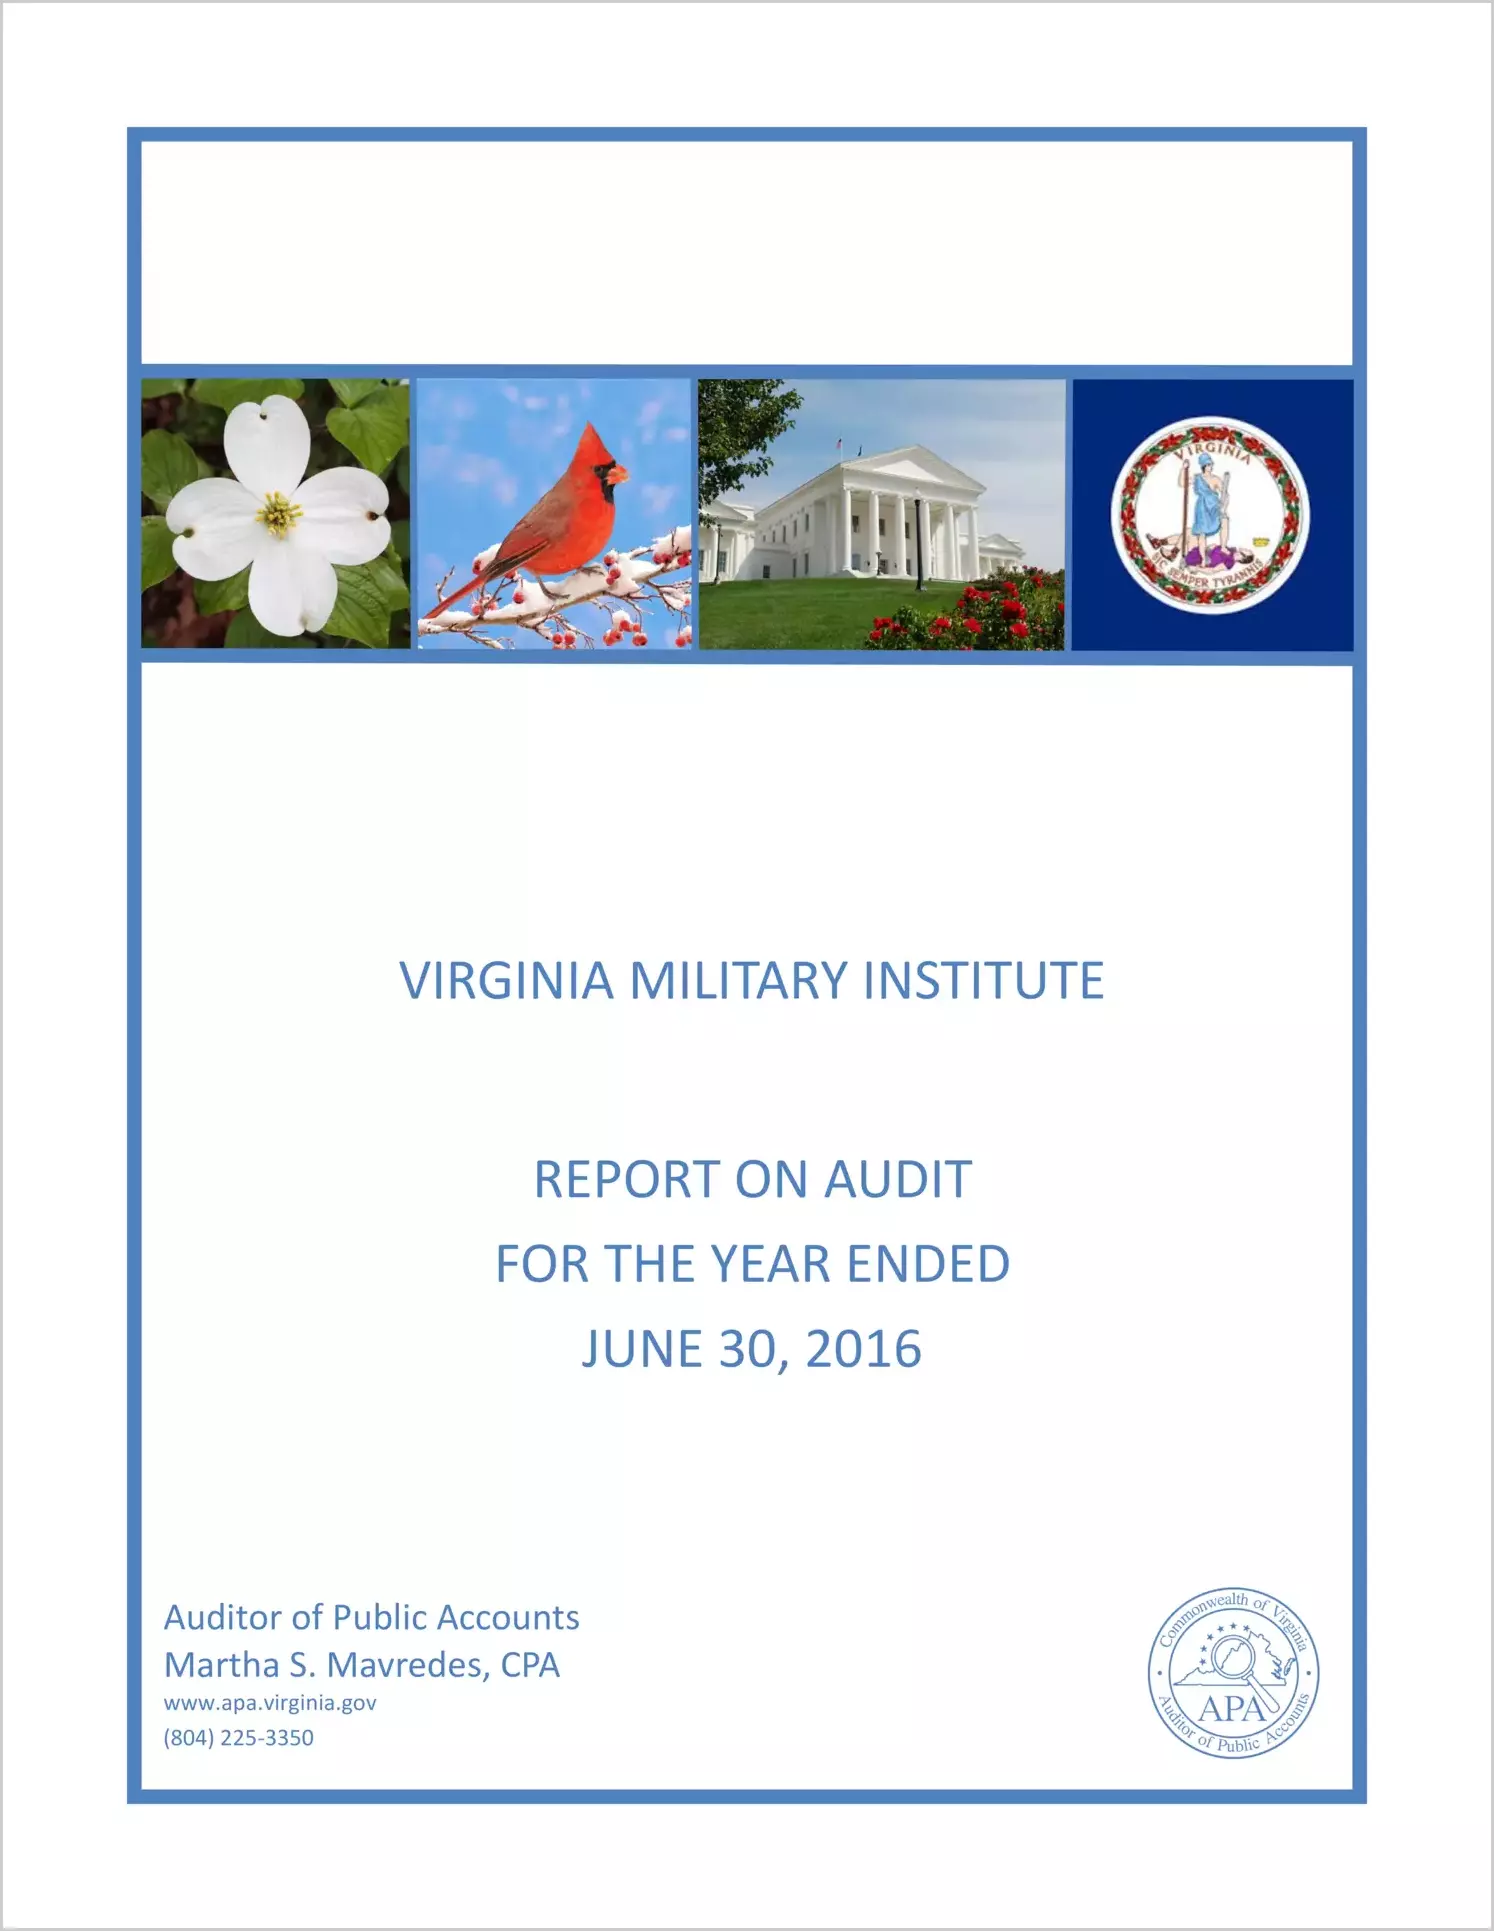 Virginia Military Institute for the year ended June 30, 2016